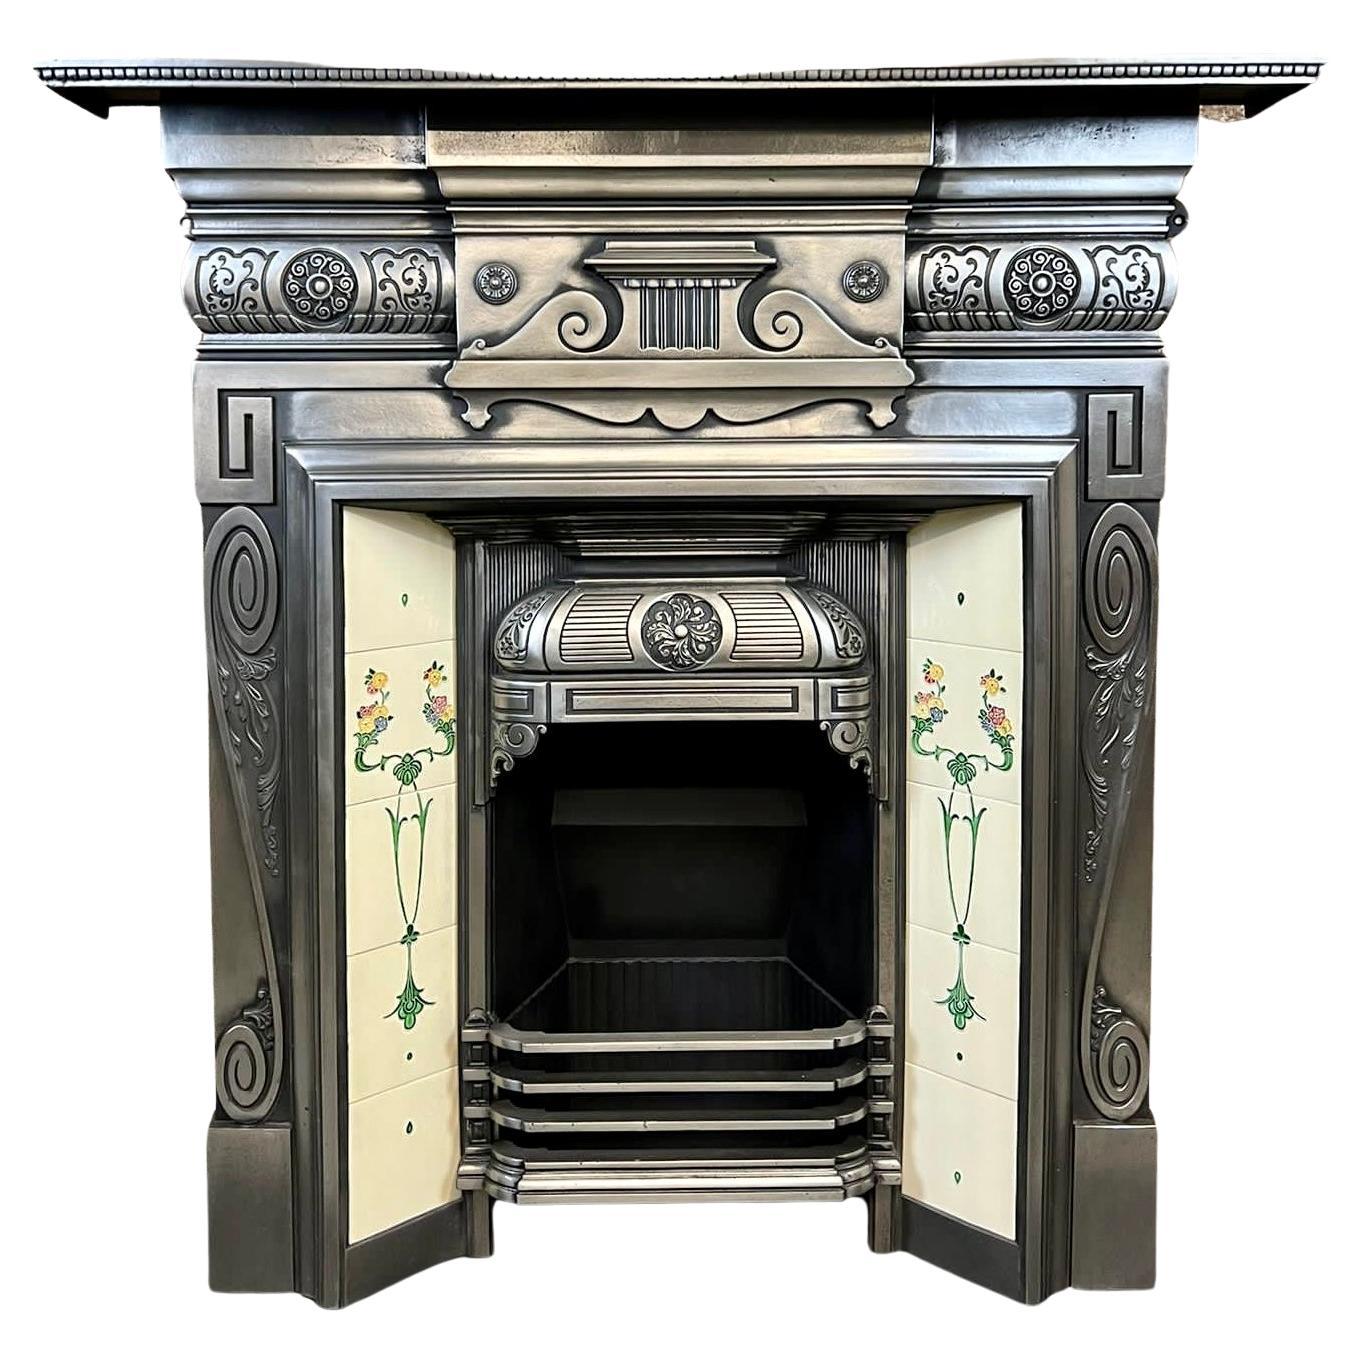 19th century cast iron tiled fireplace mantelpiece.
This fine example of an Antique original Victorian fireplace has a fully Burnished (Polished) Finish.
It is complete with fire 9.5 inch depth back, set of front bars, and decorative fixed hood.